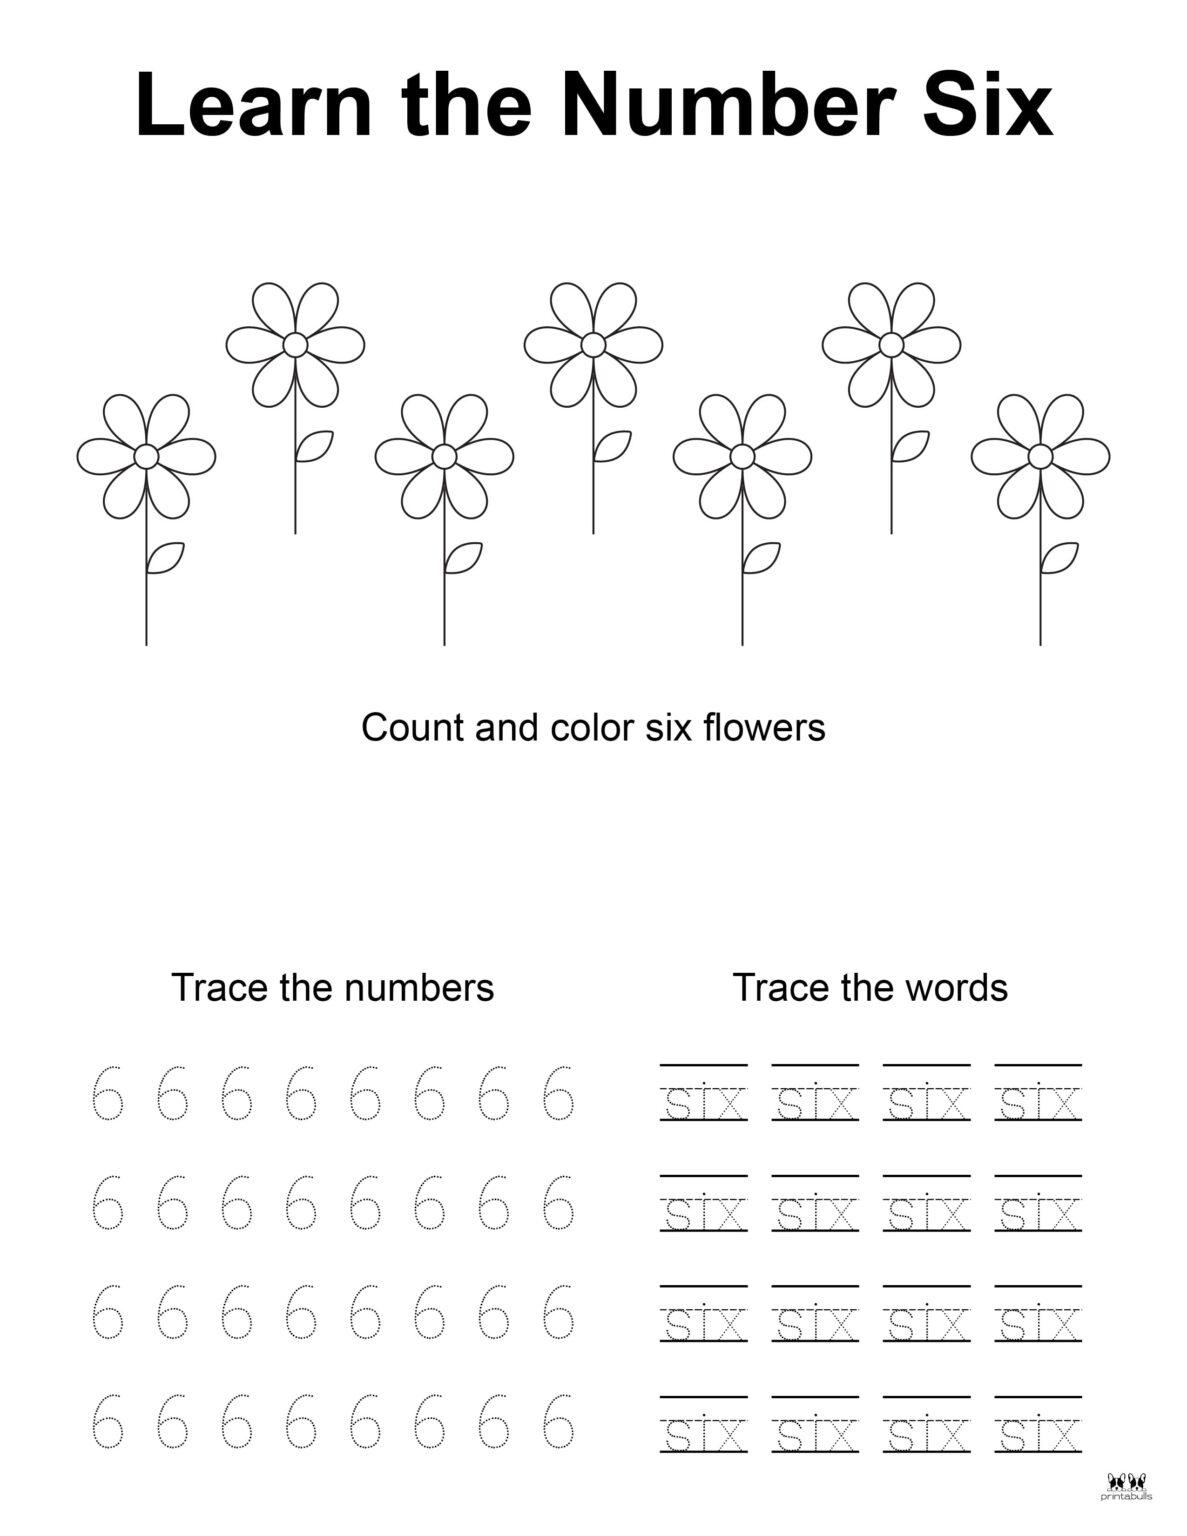 number-6-tracing-worksheets-15-free-pages-printabulls